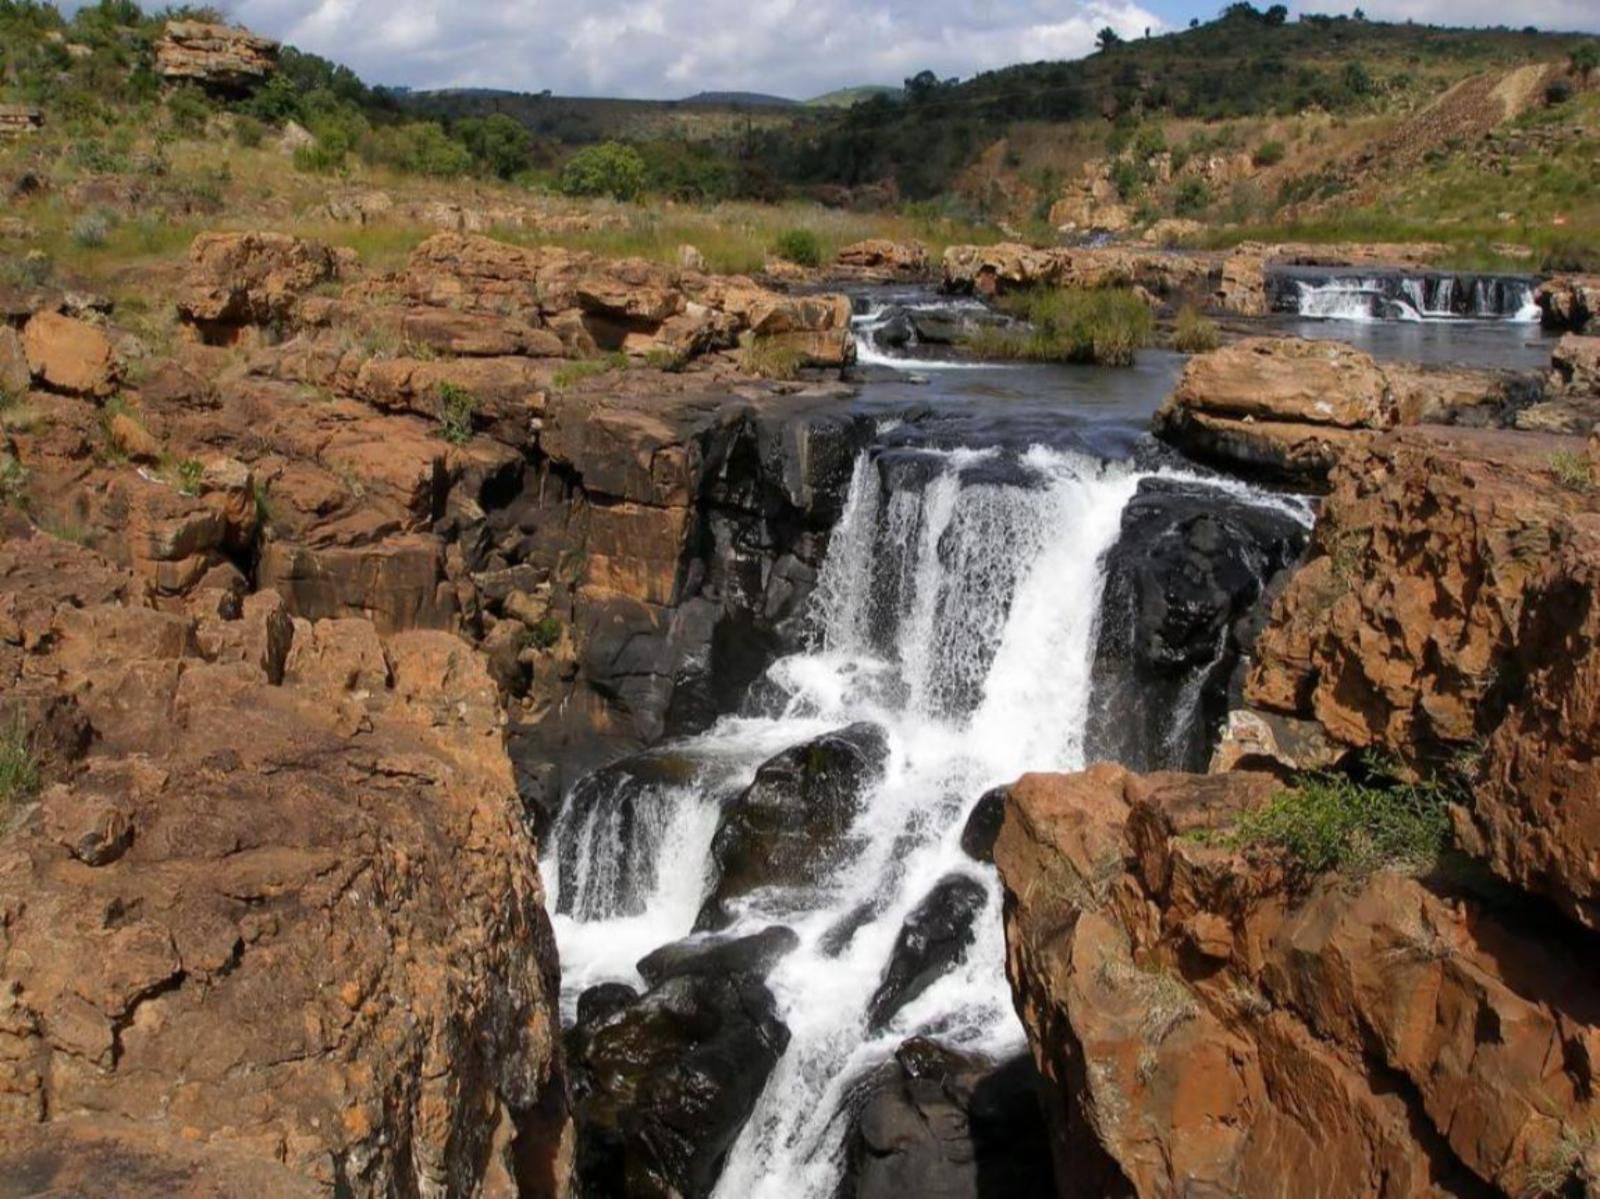 Dreamfields Guesthouse Hazyview Mpumalanga South Africa Canyon, Nature, River, Waters, Waterfall